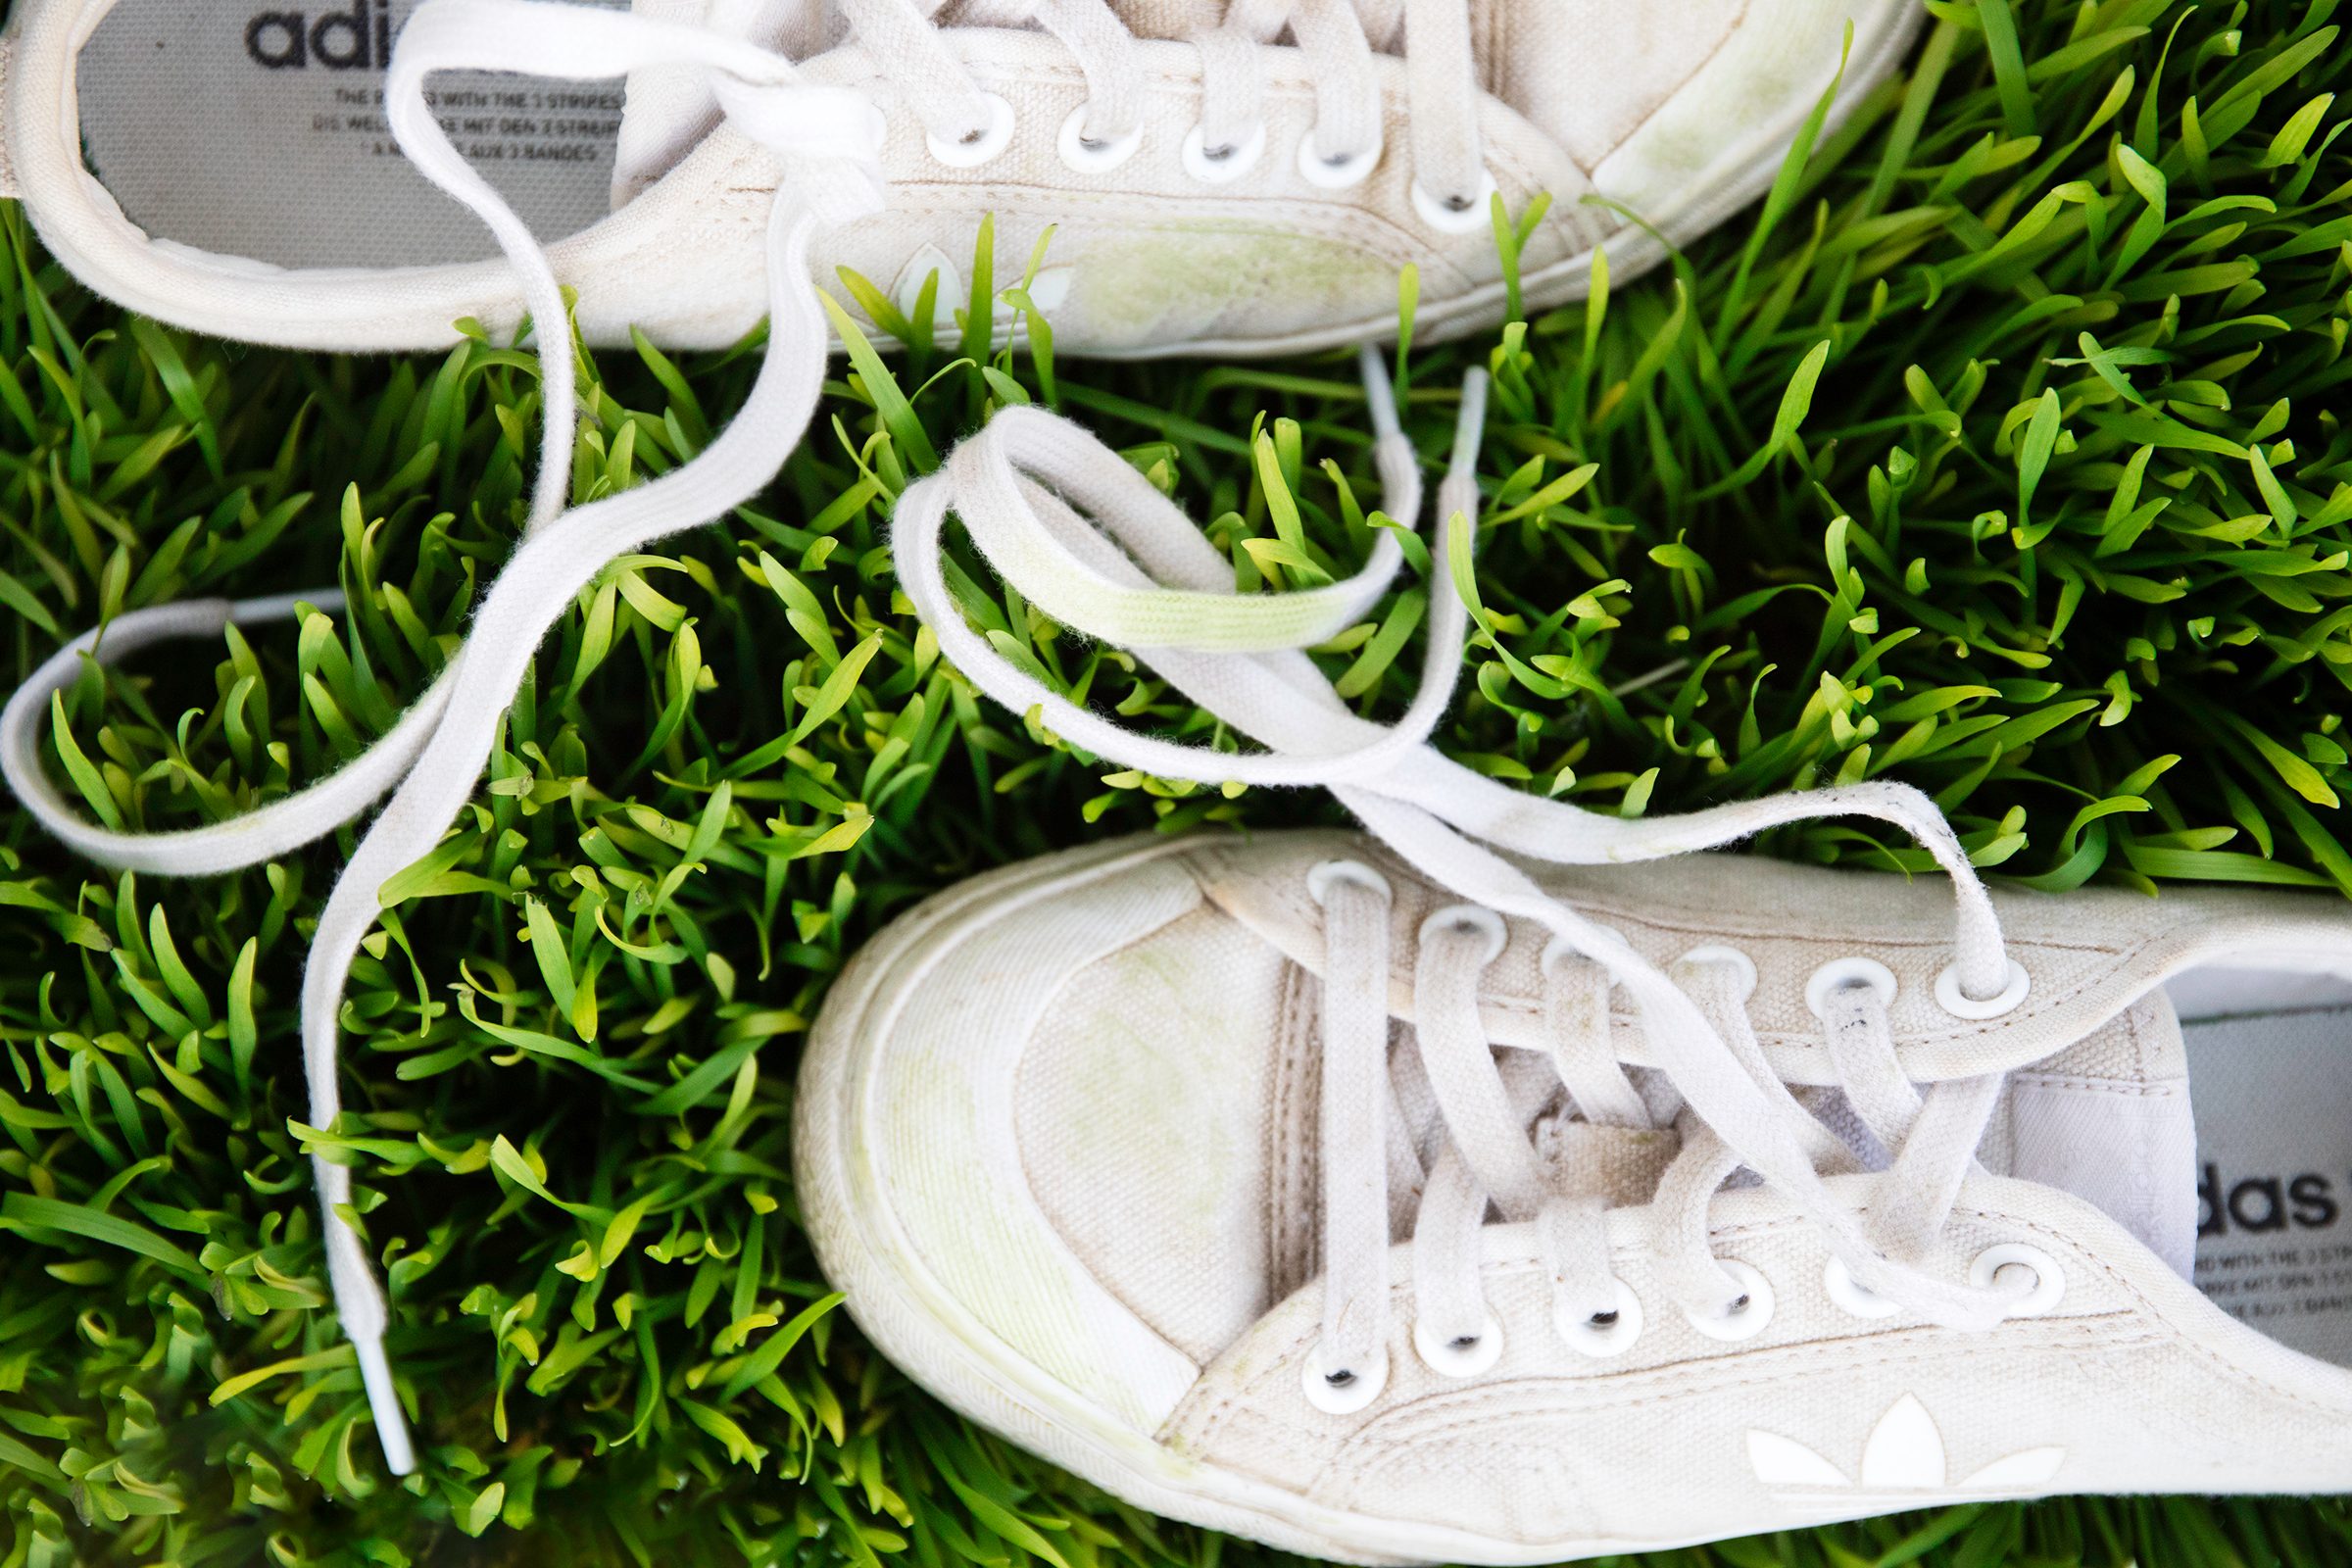 How to remove grass stains